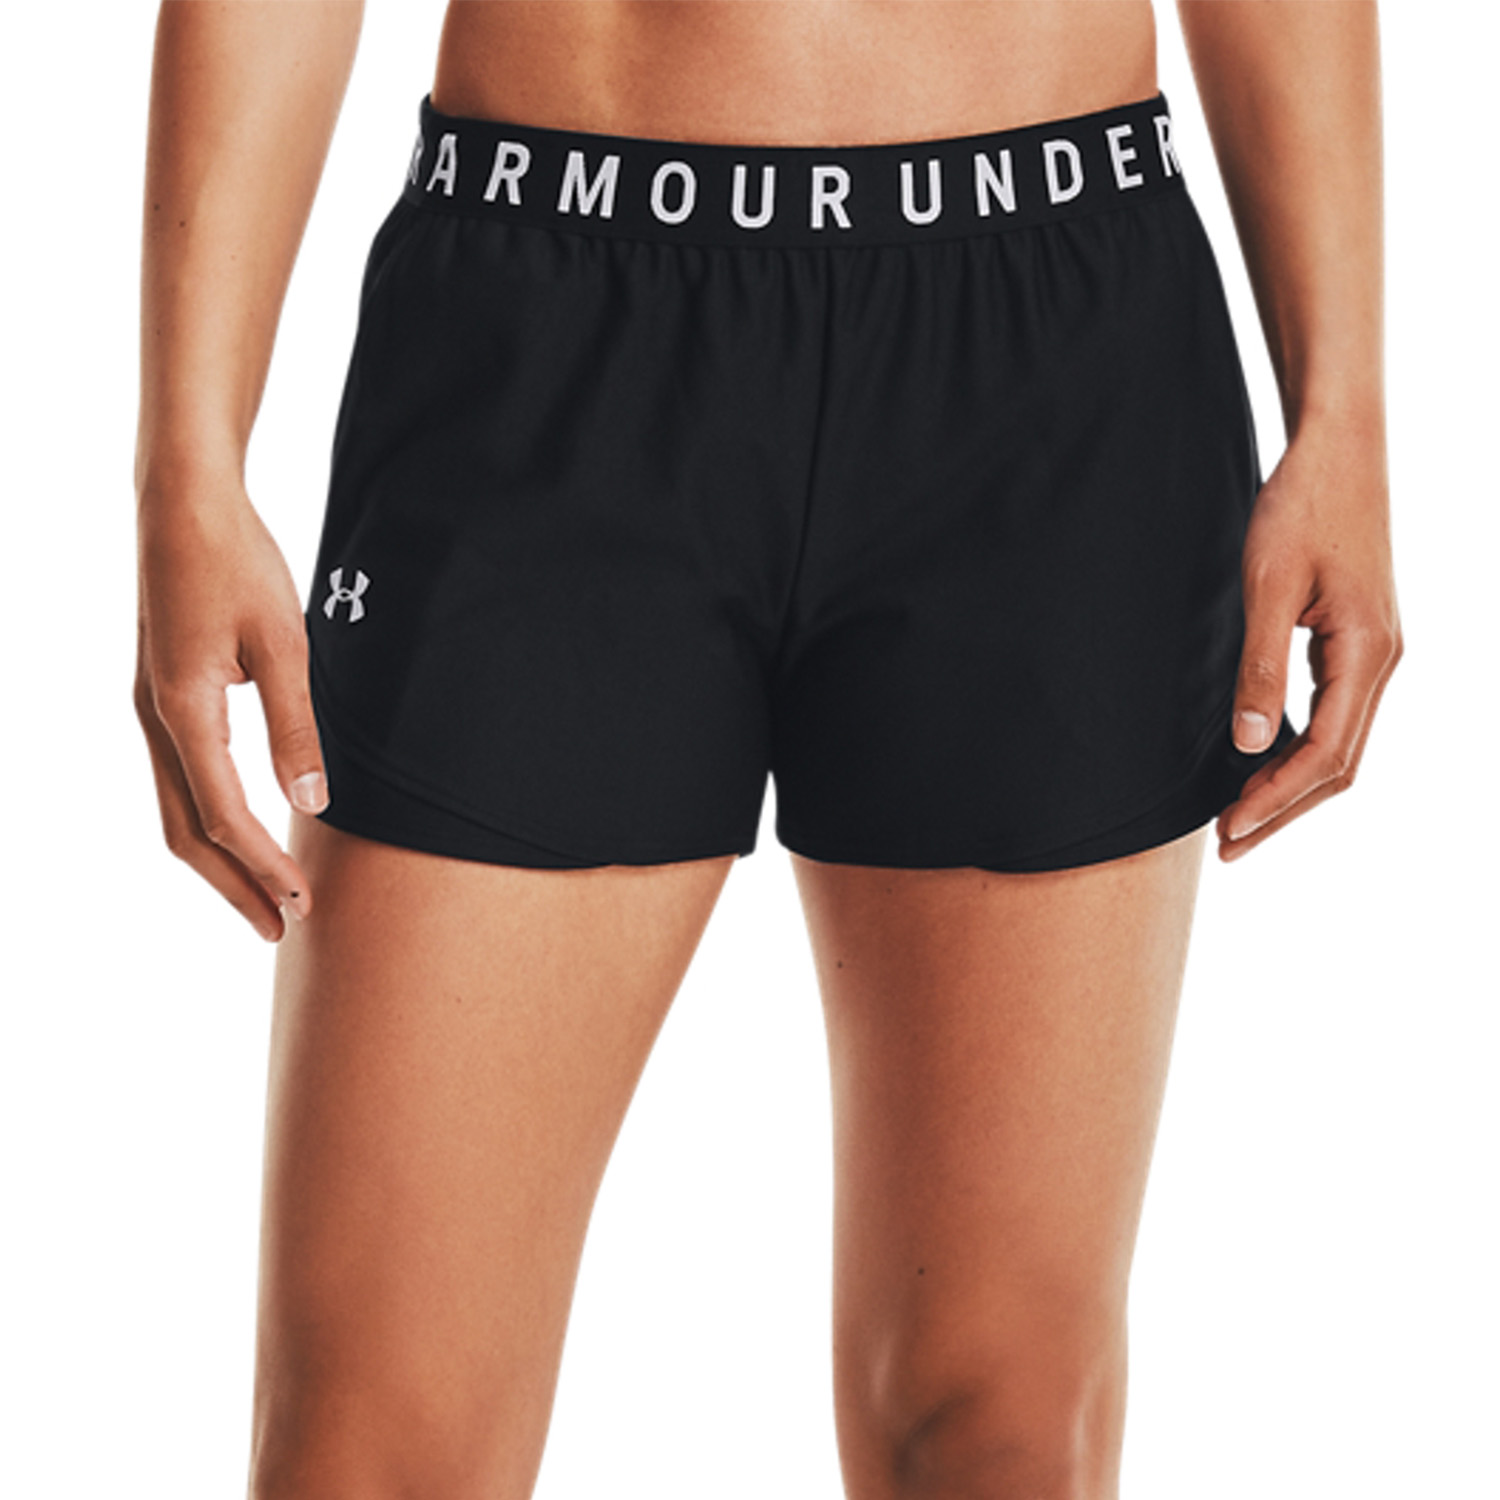 Under Armour Play Up 3.0 3in Shorts - Black/White